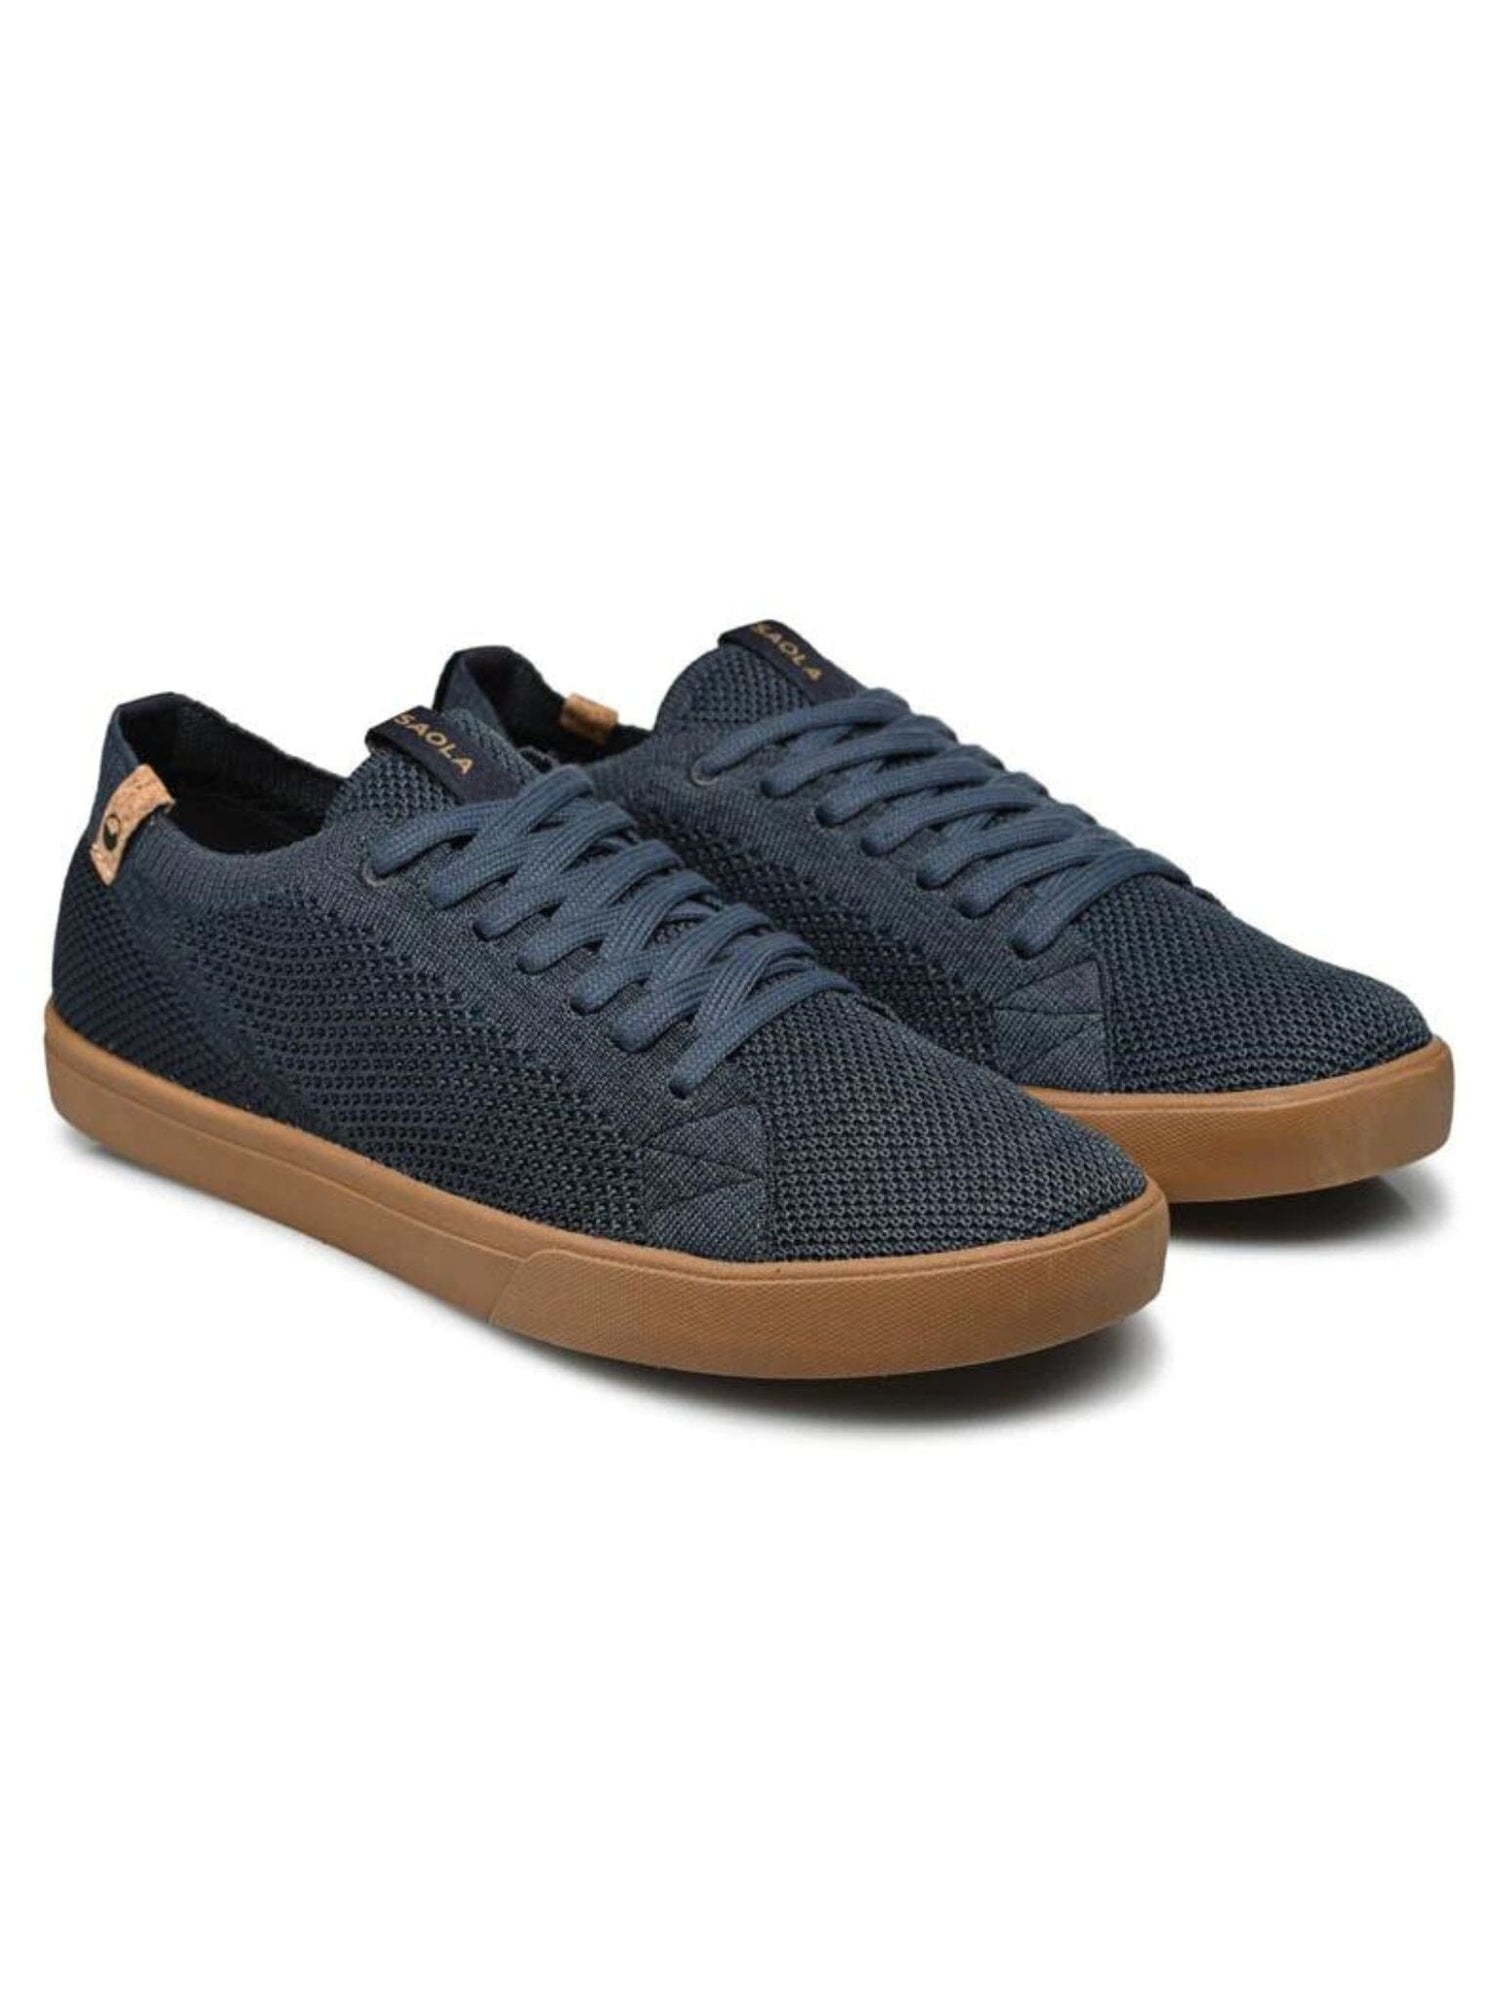 Saola M's Cannon Knit - Recycled PET Navy Shoes